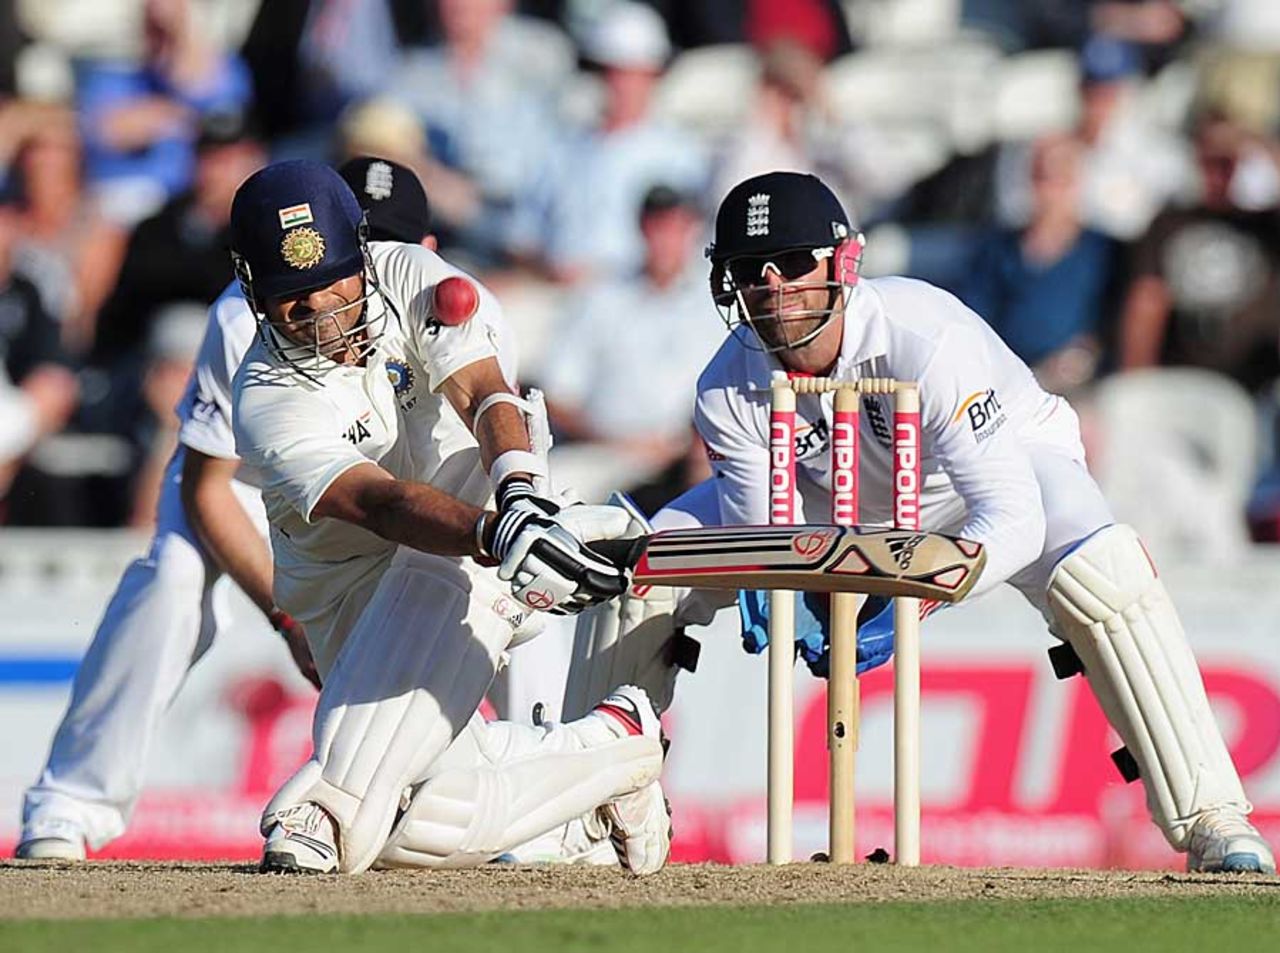 Sachin Tendulkar was caught after he gloved one while sweeping, England v India, 4th Test, The Oval, 3rd day, August 20, 2011